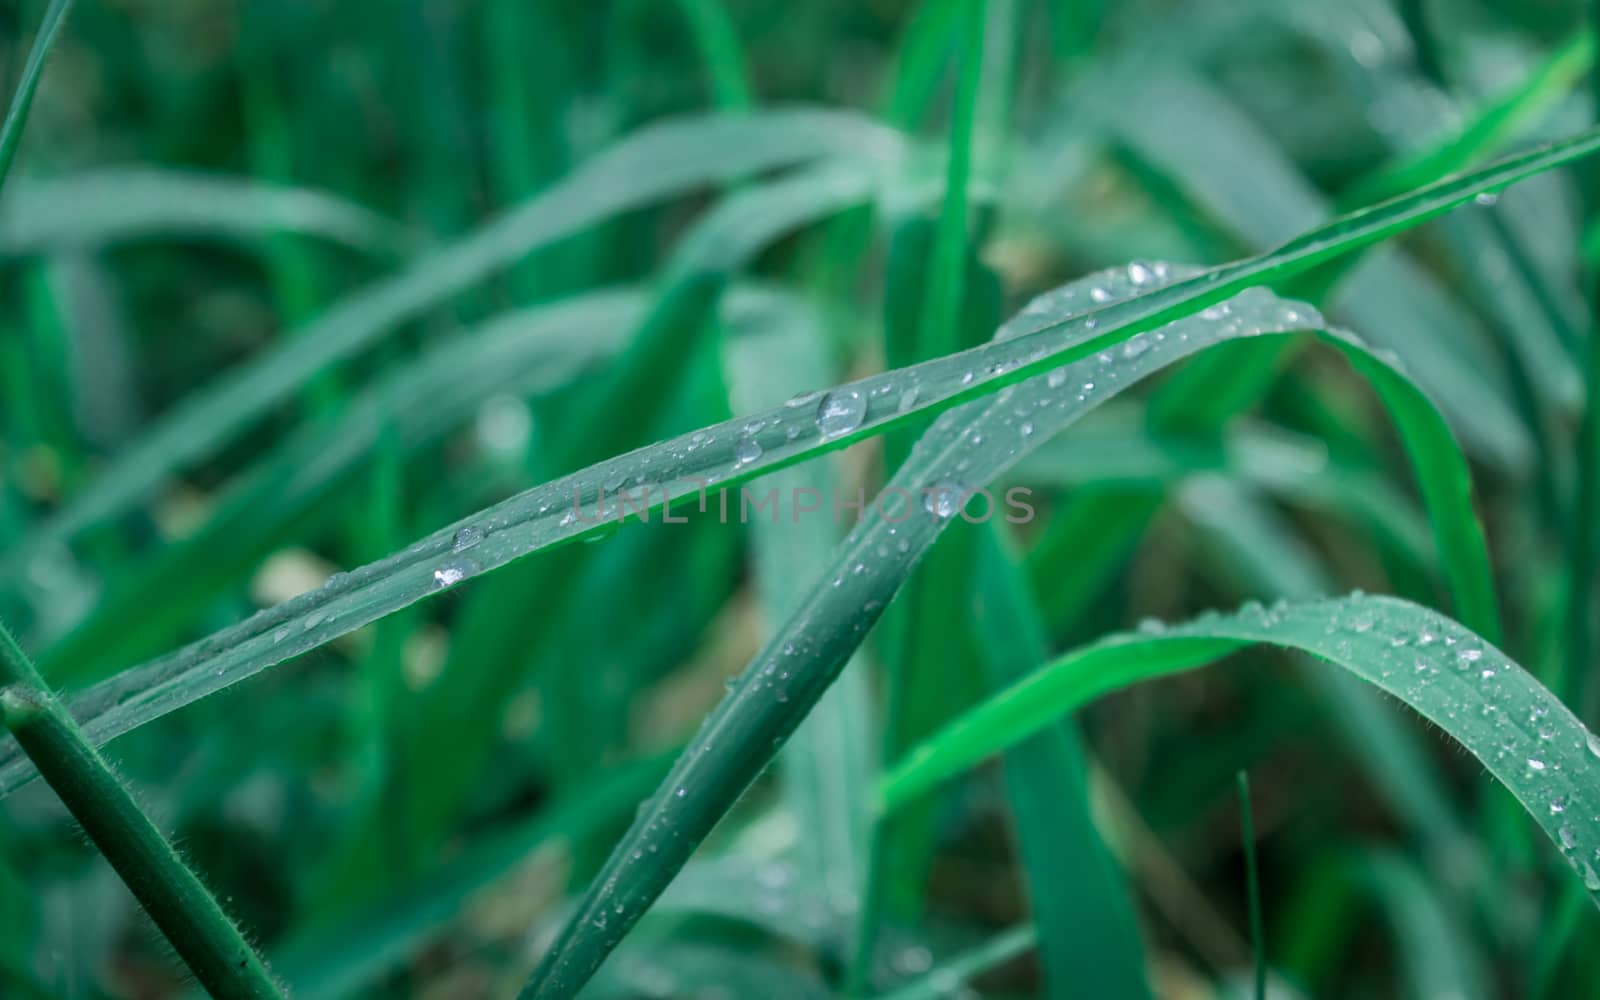 Raindrops on leaf. Close up of rain water dew droplets on grass crop plant. Sunlight reflection. Rural scene in agricultural field lawn meadow. Winter morning rainy season. Beauty in nature background by sudiptabhowmick